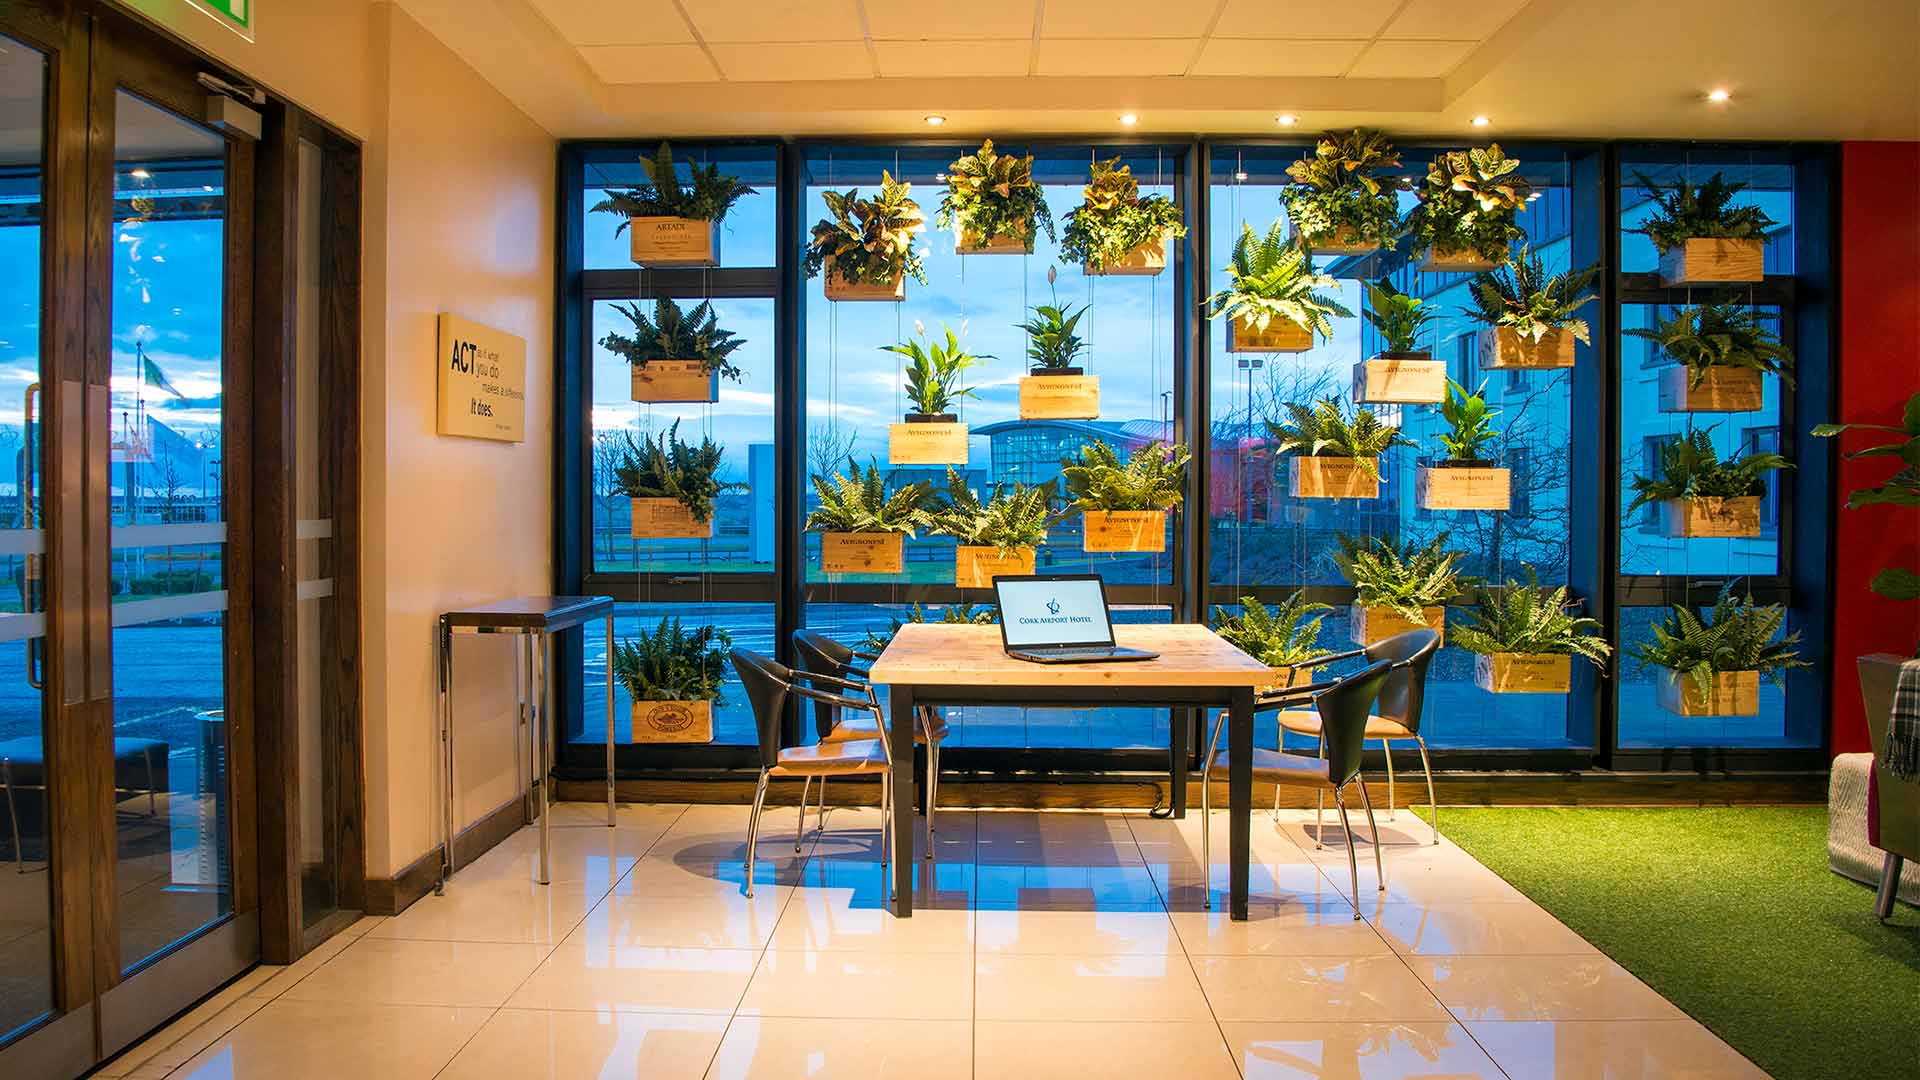 Plants in numerous handing baskets in the Cork Airport Lobby